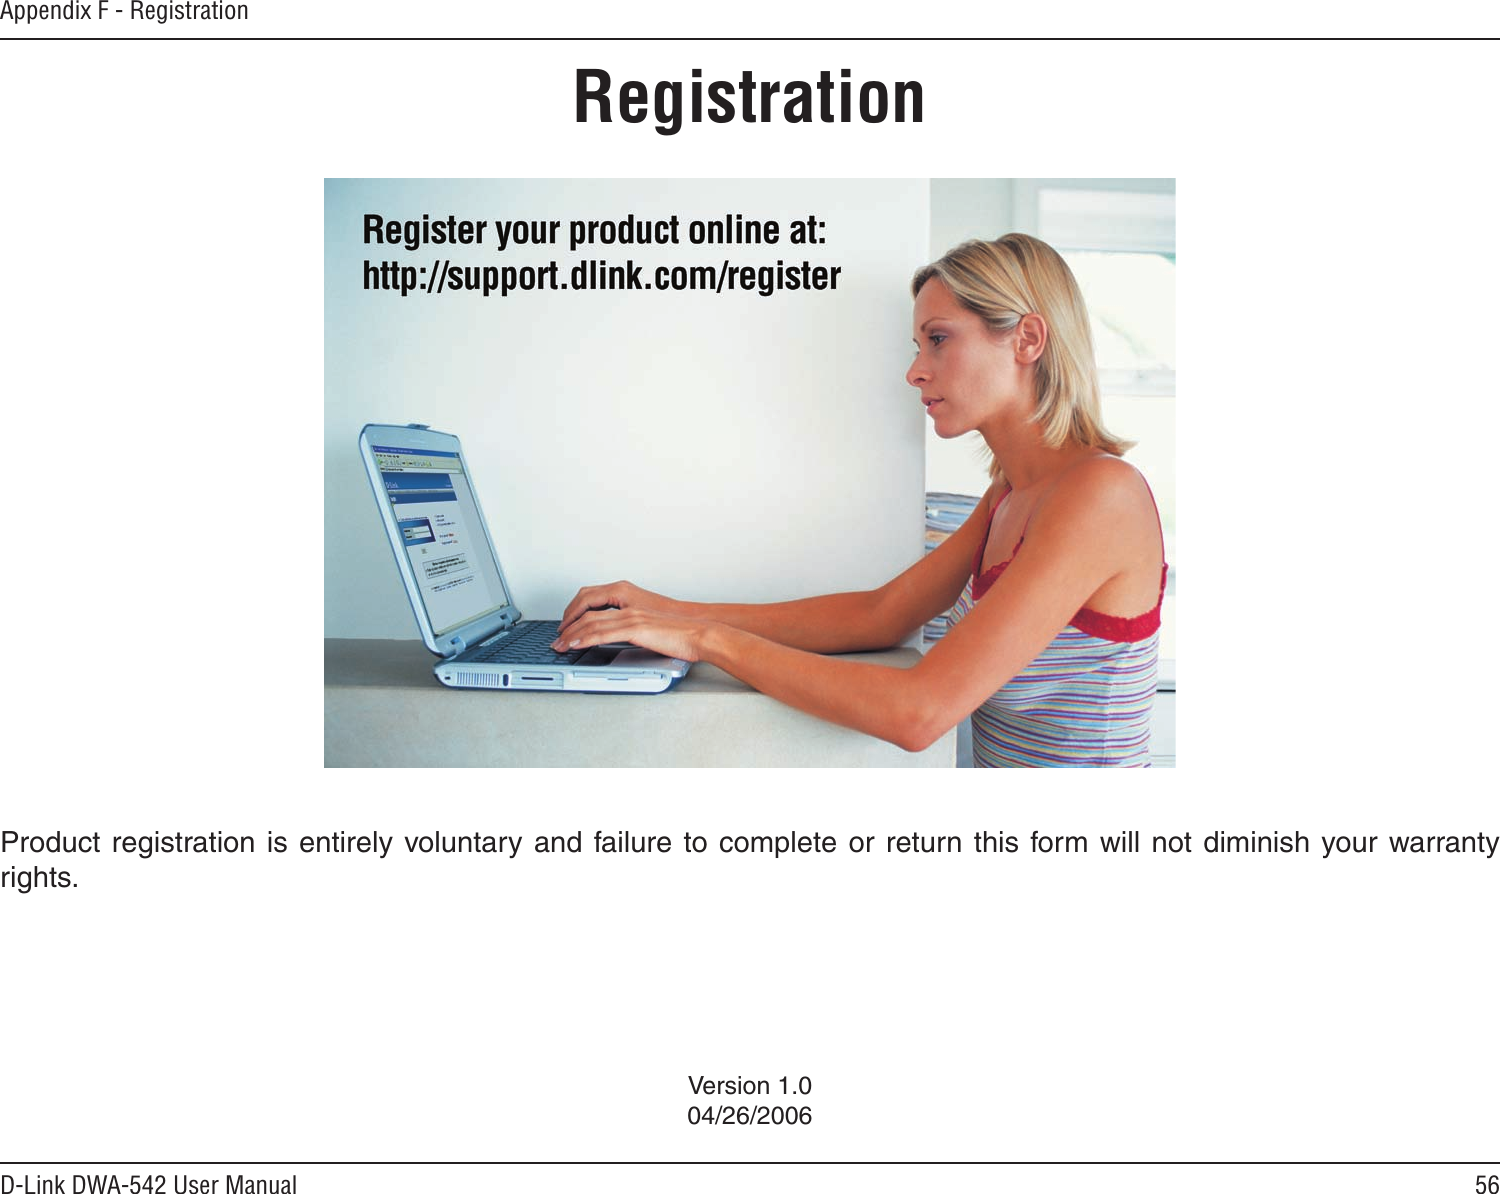 56D-Link DWA-542 User ManualAppendix F - RegistrationVersion 1.004/26/2006Product registration is entirely  voluntary and failure to complete or return this form will  not diminish your warranty rights.Registration